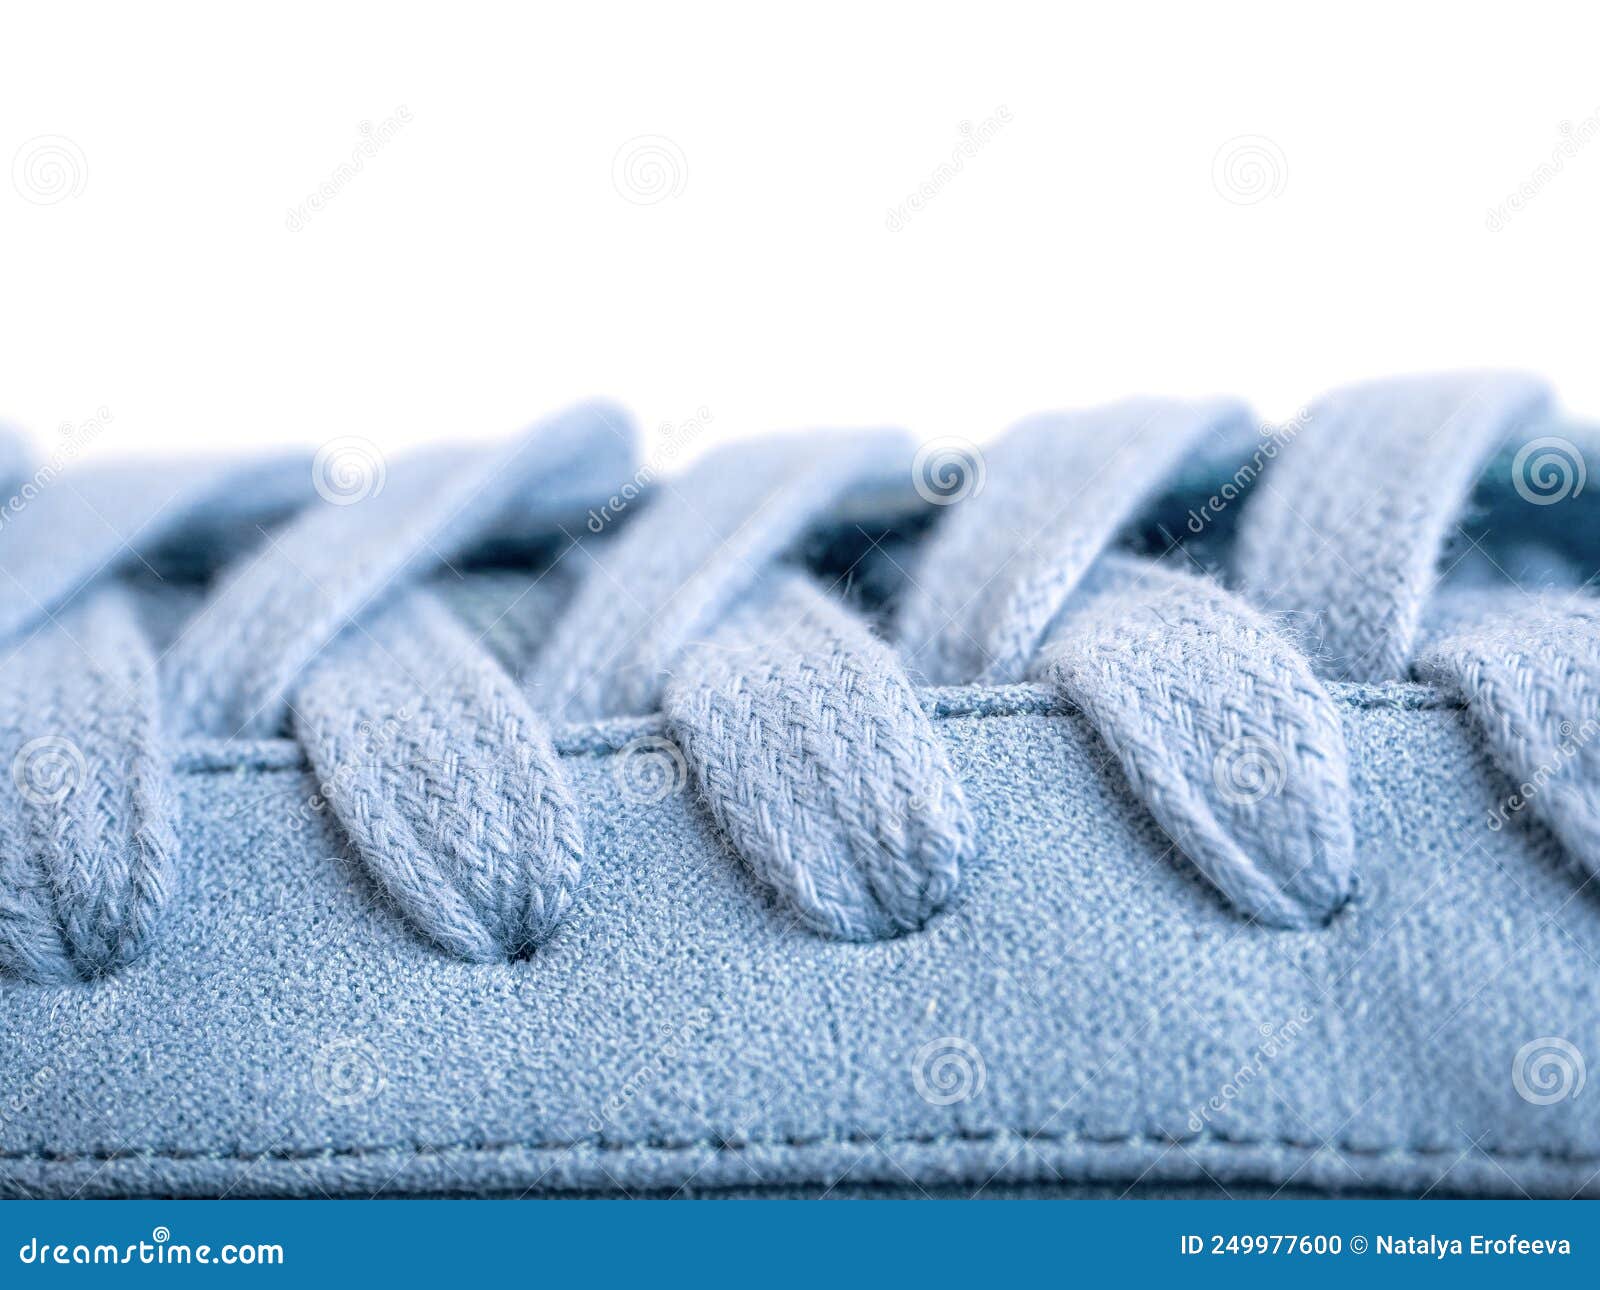 shoestrings of blue color pattern. closeup lacing background texture for . shoelaces, shoestrings or bootlaces.